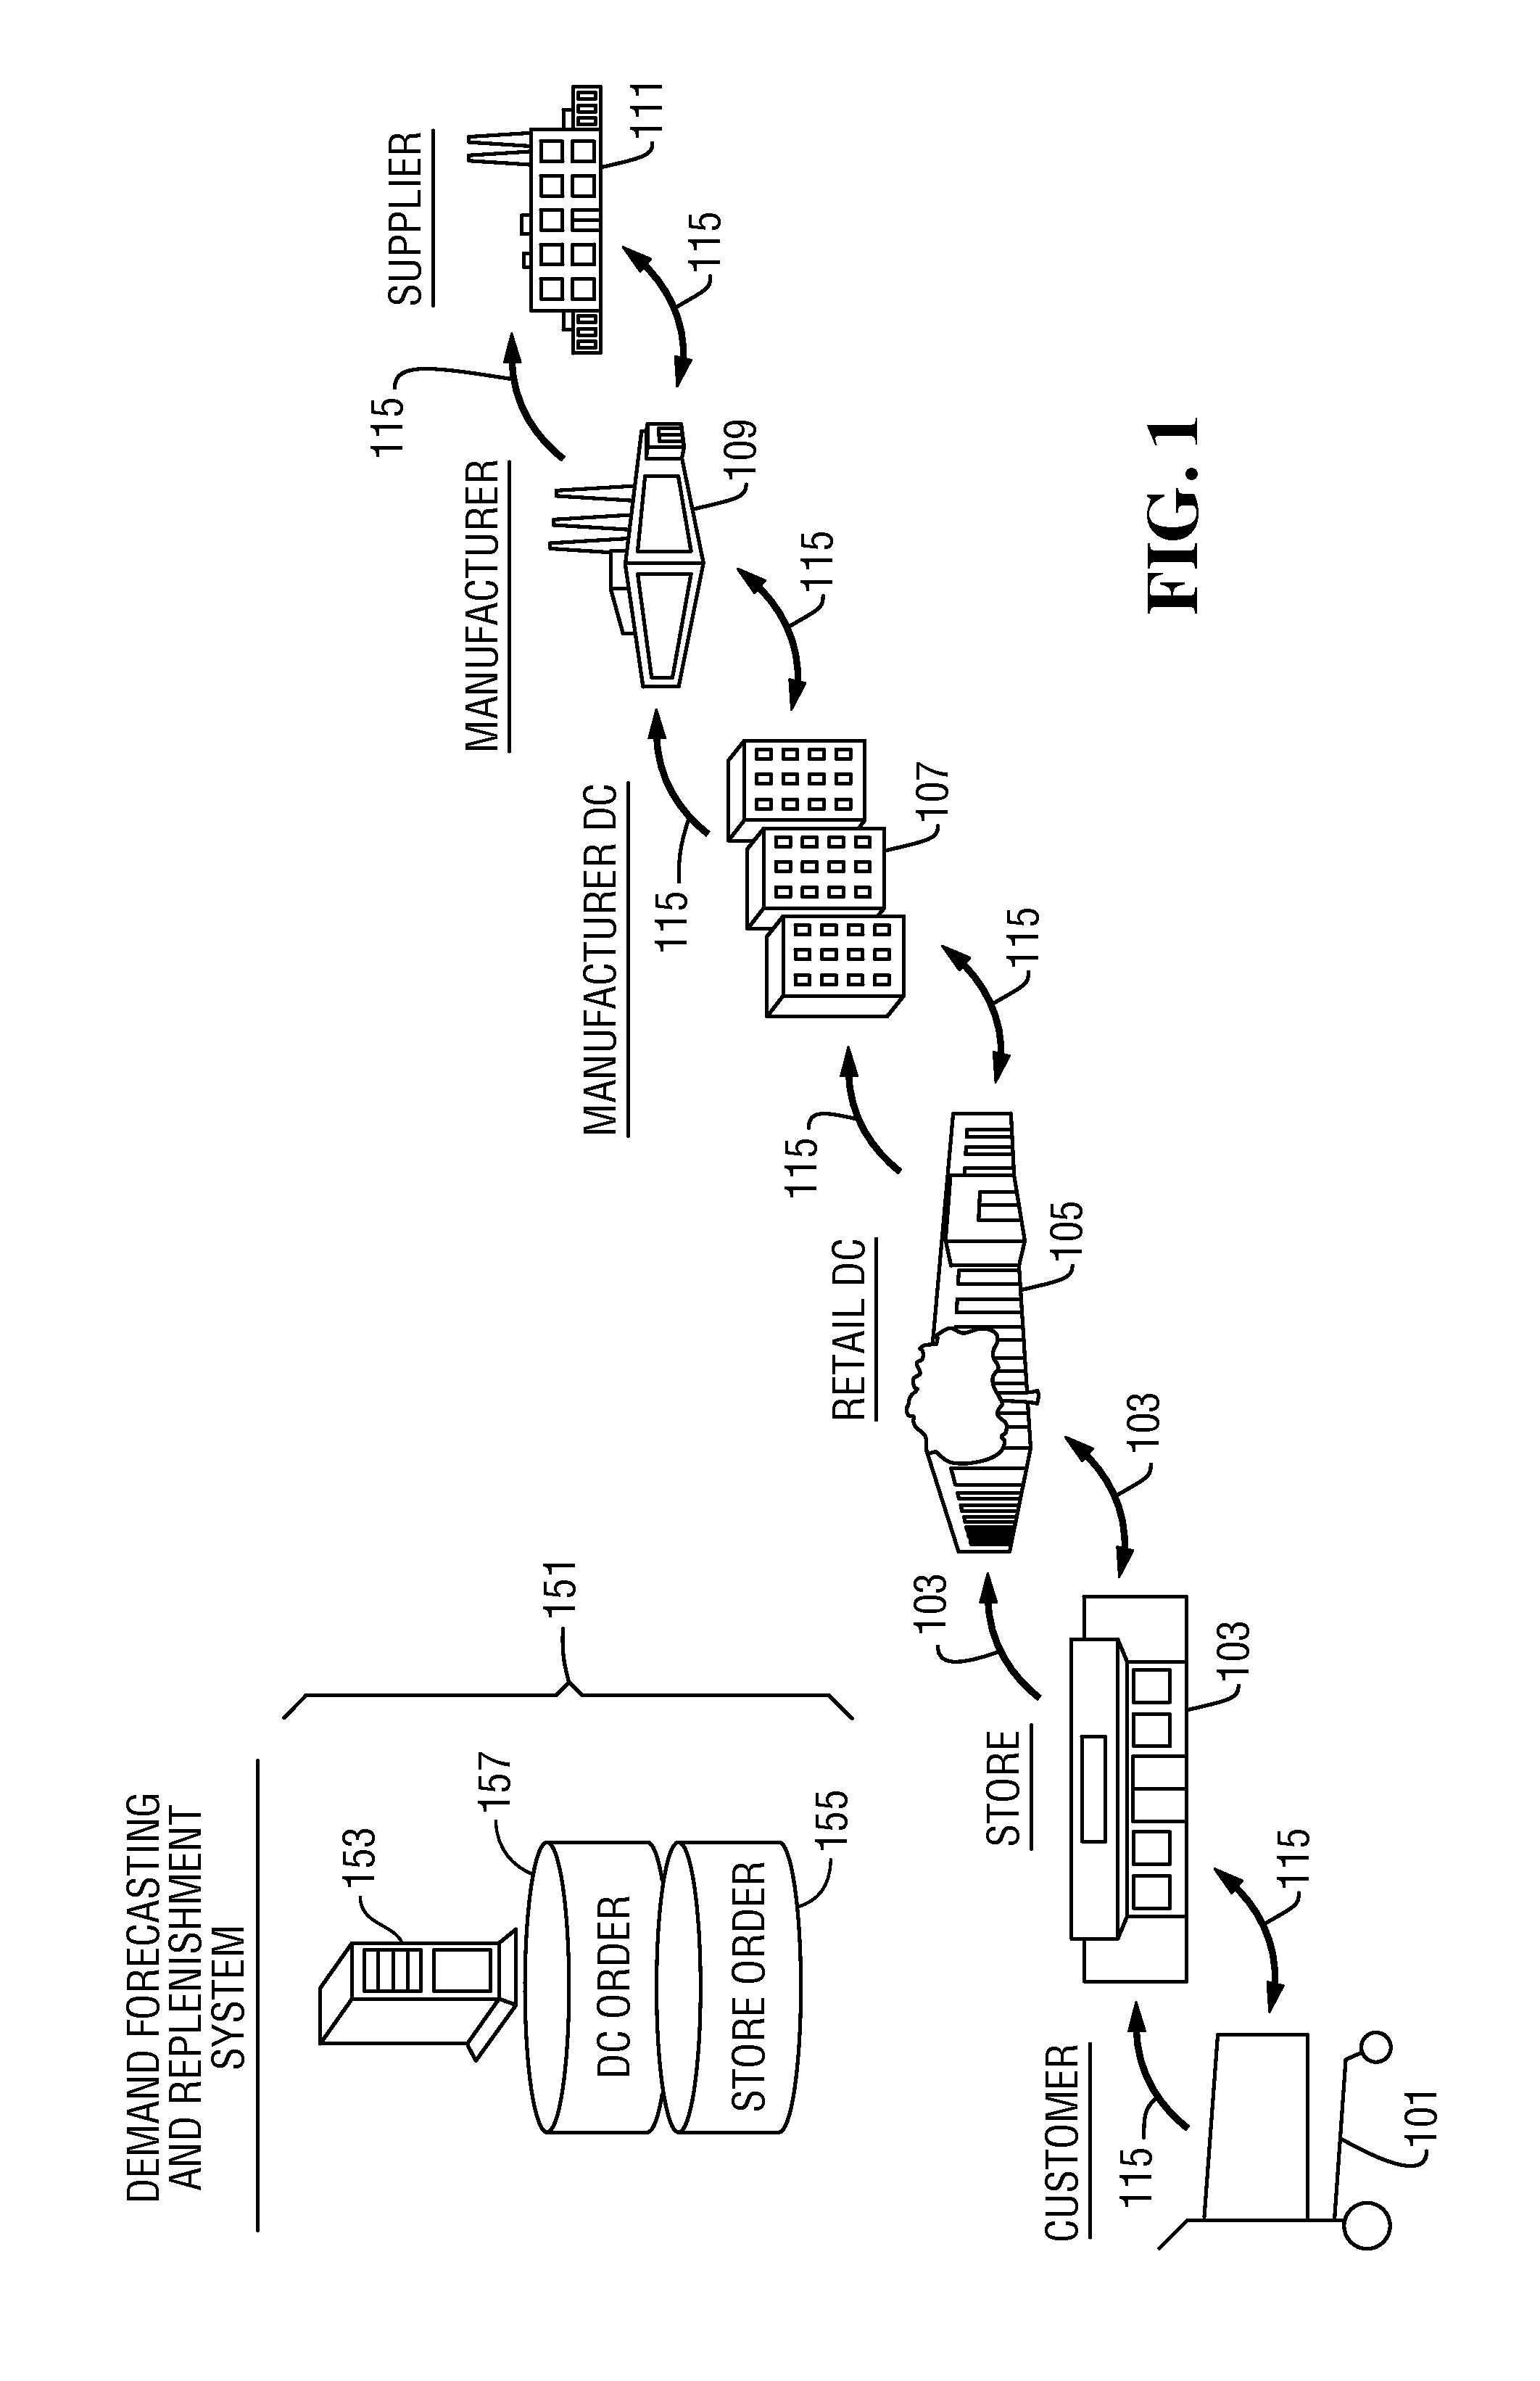 Method and system for optimizing product inventory cost and sales revenue through tuning of replenishment factors